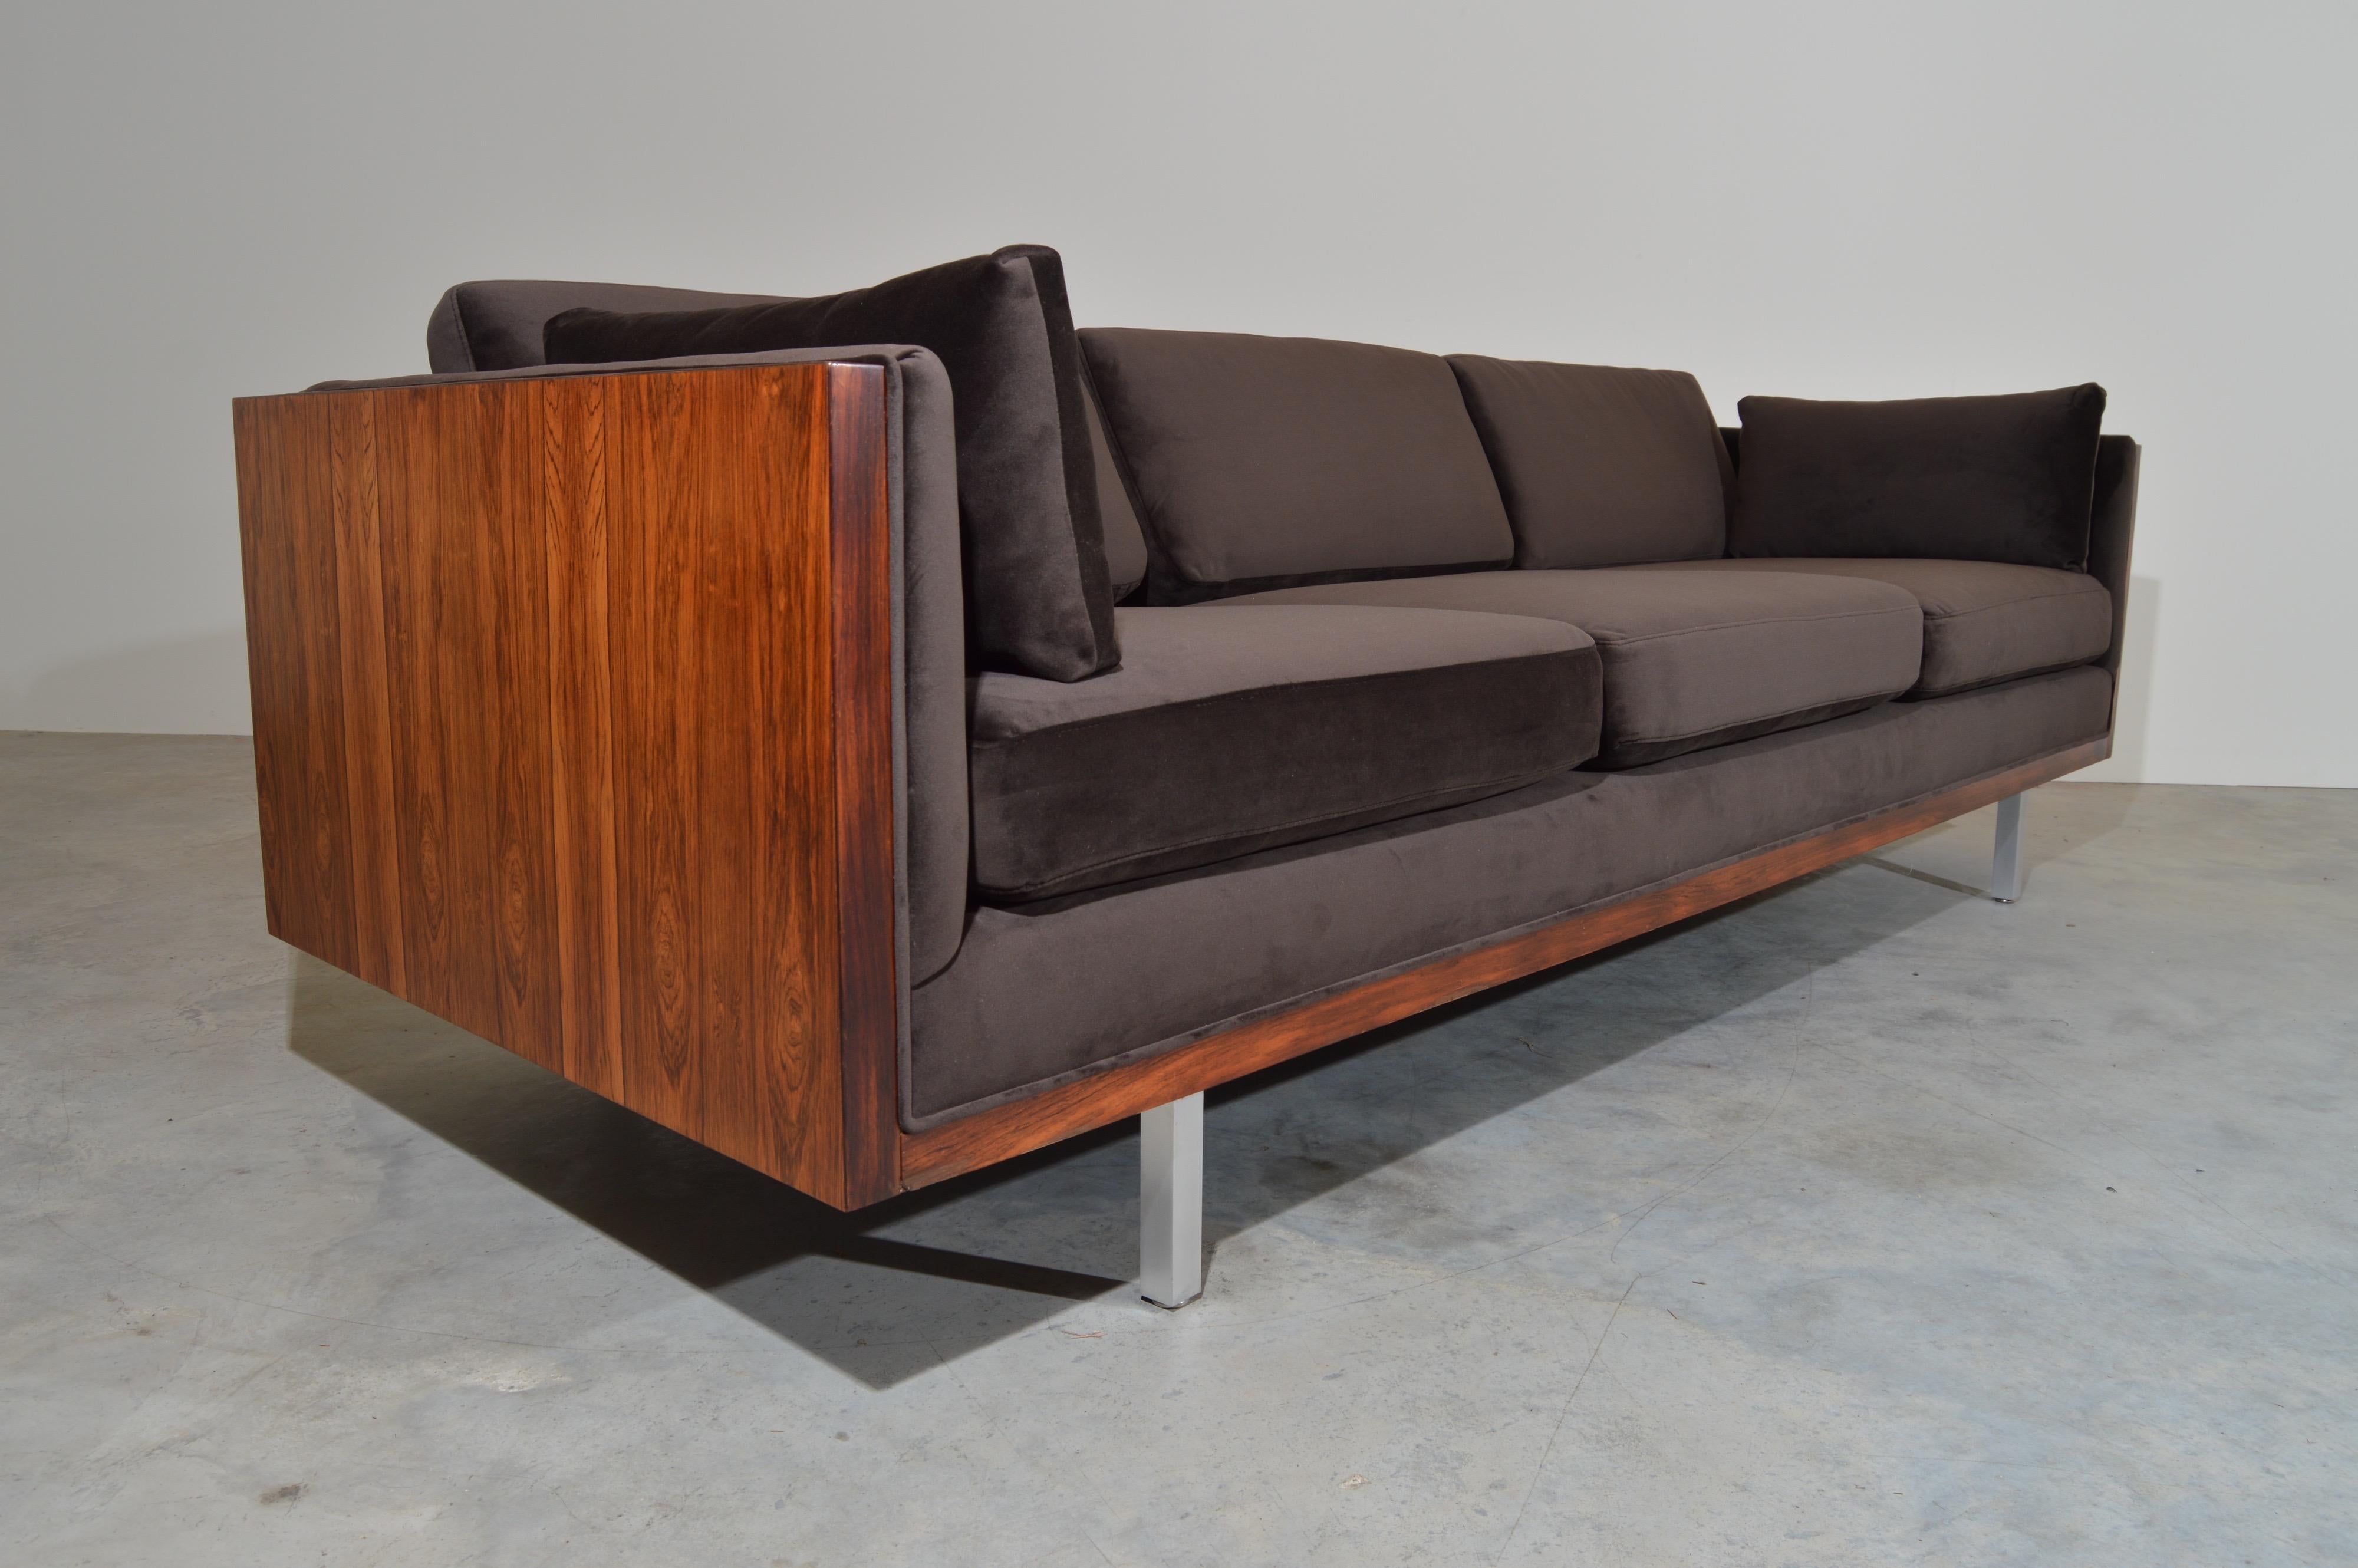 Milo baughman for directional rosewood panel case sofa in “Royale Chocolate” Performance Velvet. 
In excellent condition having new high end velvet upholstery with new cushioning as well. Original DIRECTIONAL tag is in tact. 
Extremely soft and